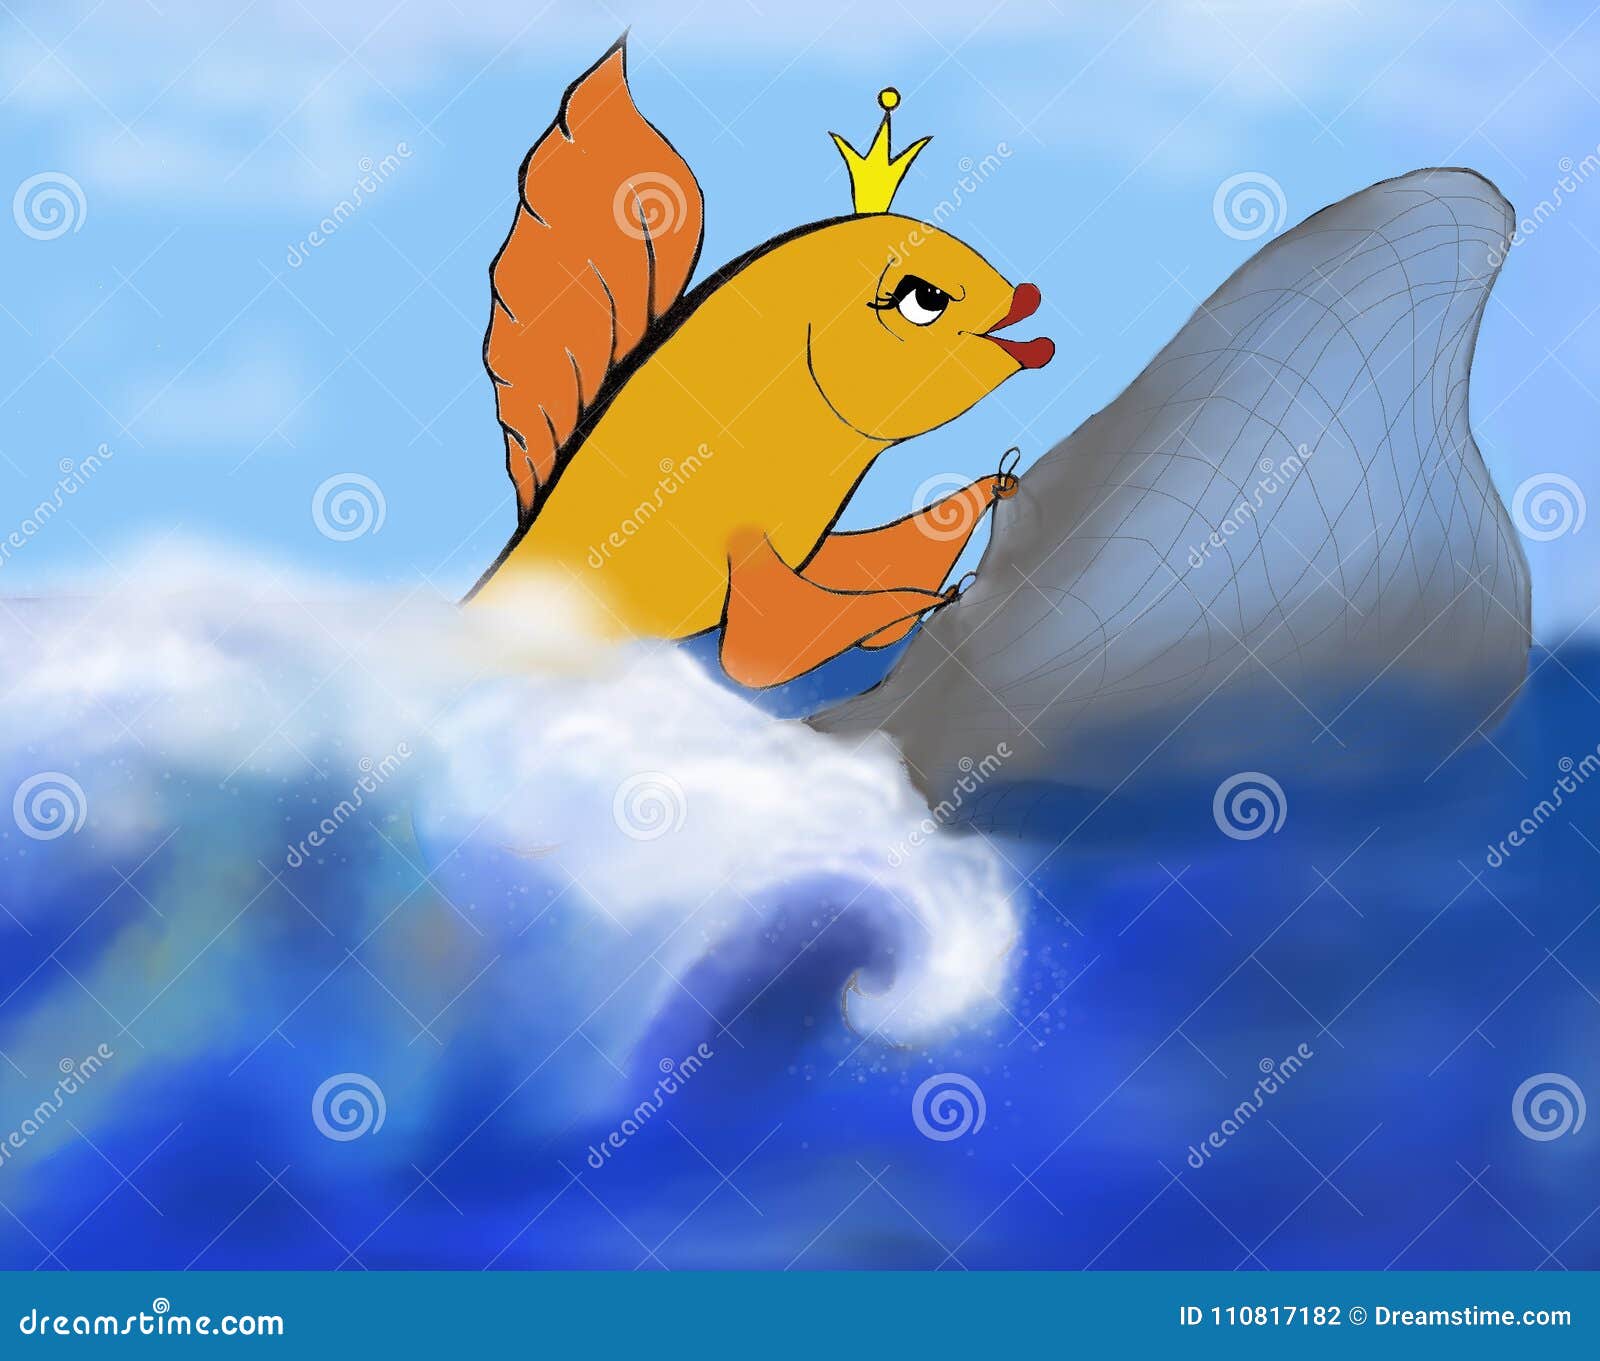 https://thumbs.dreamstime.com/z/episode-tale-golden-fish-slightly-redone-version-fairy-here-may-also-net-to-throw-110817182.jpg